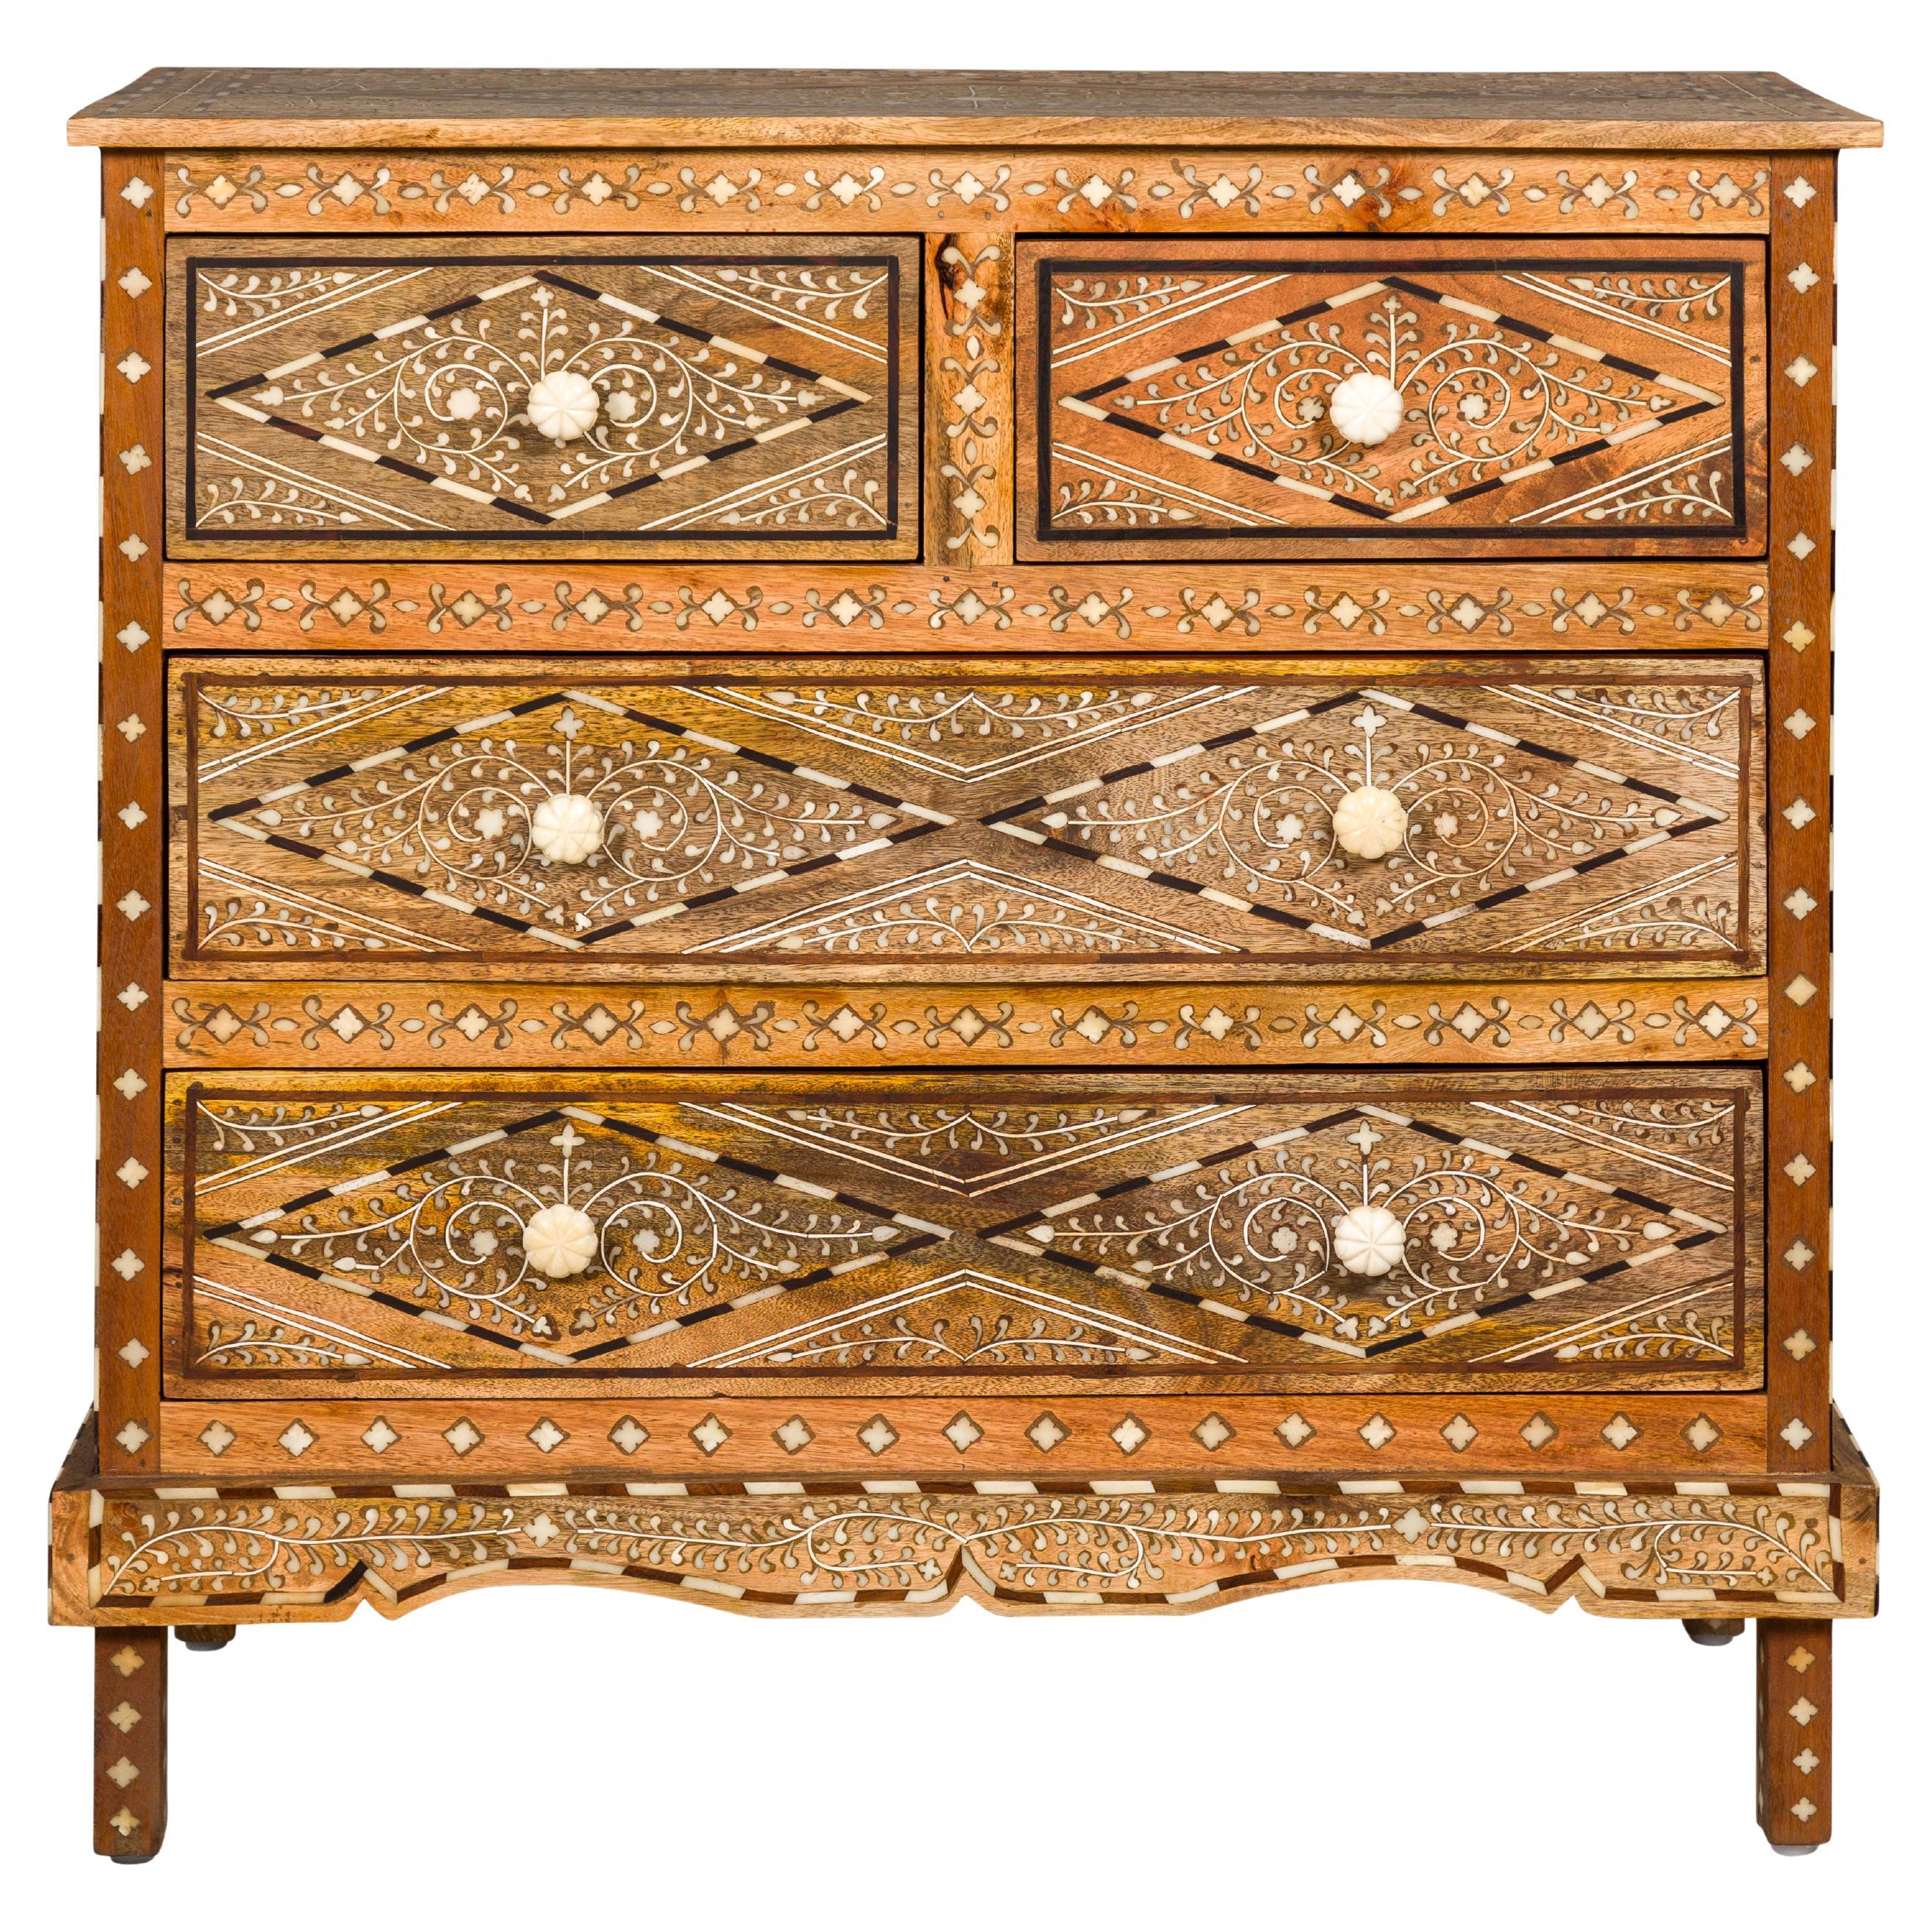 Anglo-Indian Style Mango Wood Four-Drawer Chest with Foliage Themed Bone Inlay